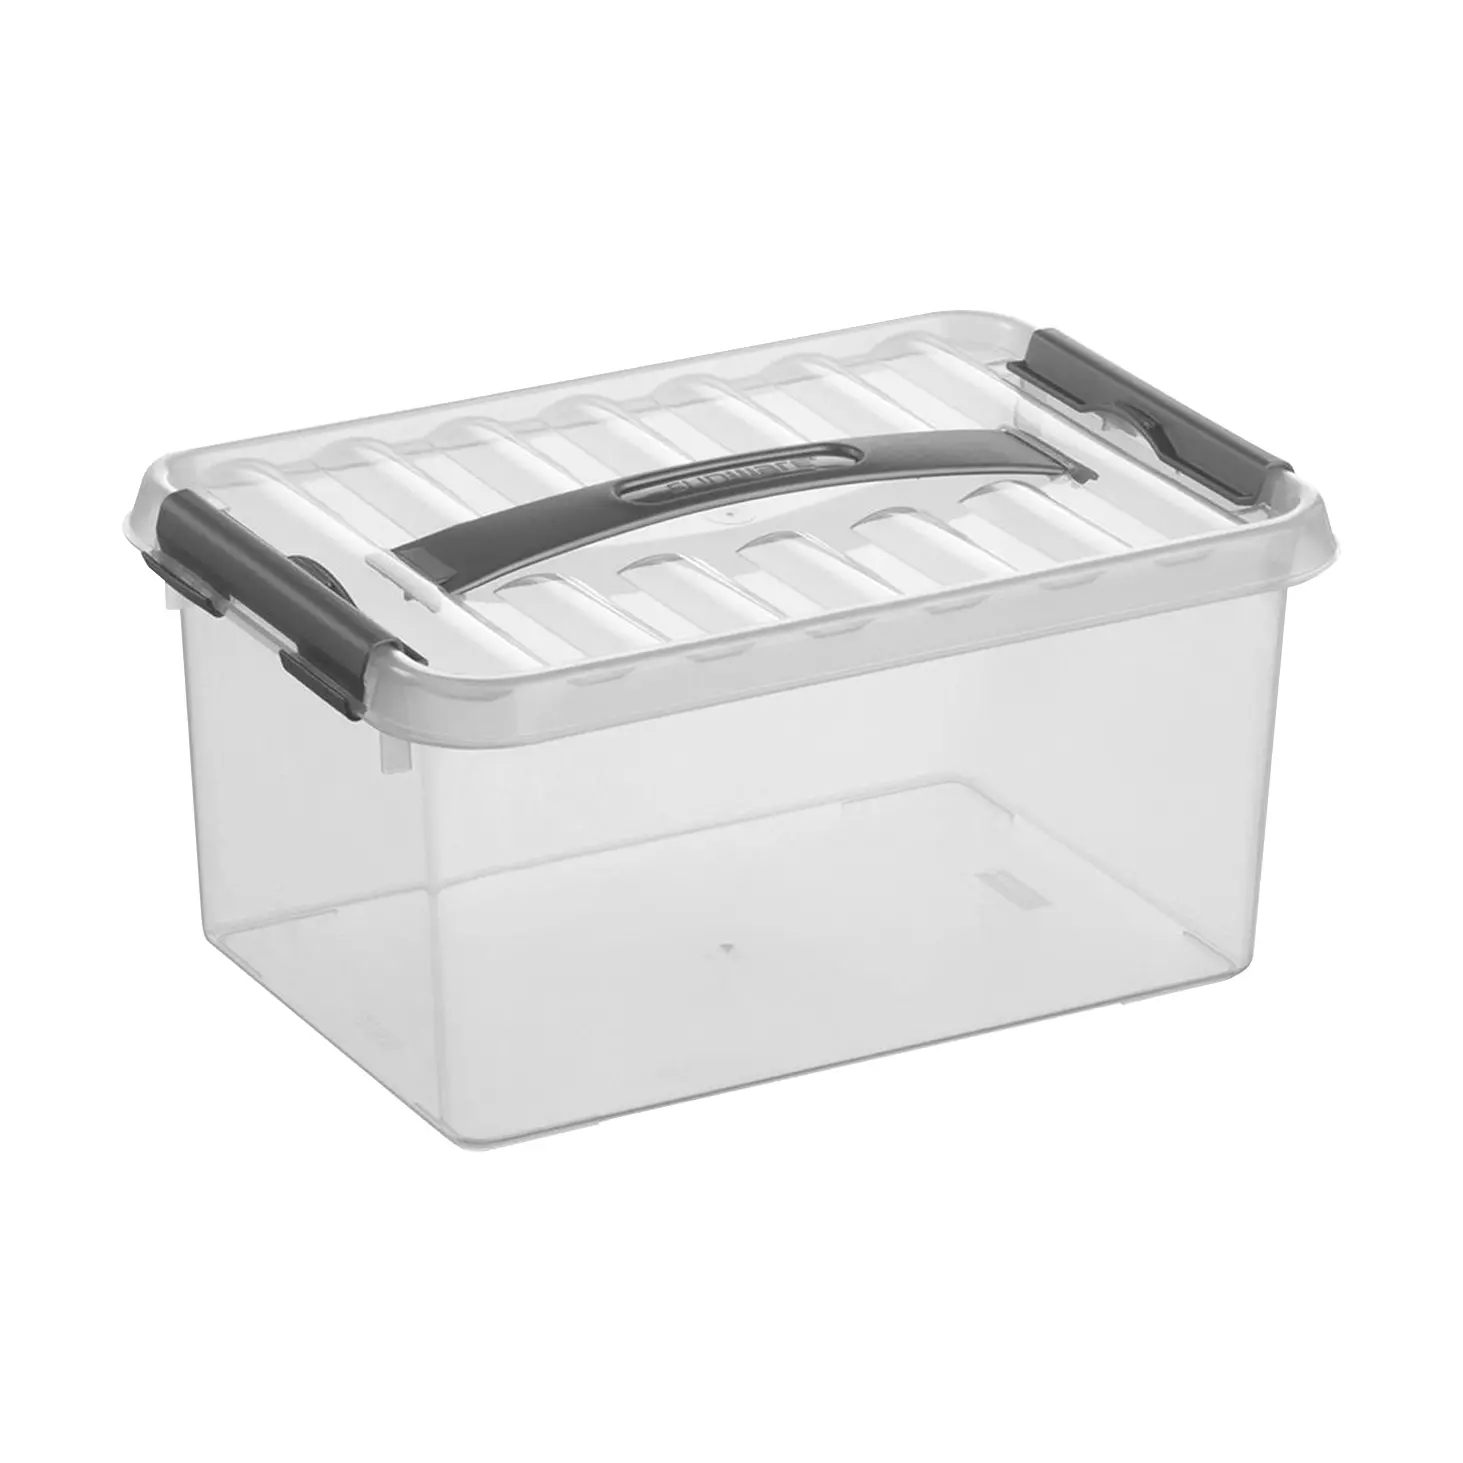 Storage box with locking clips and handle